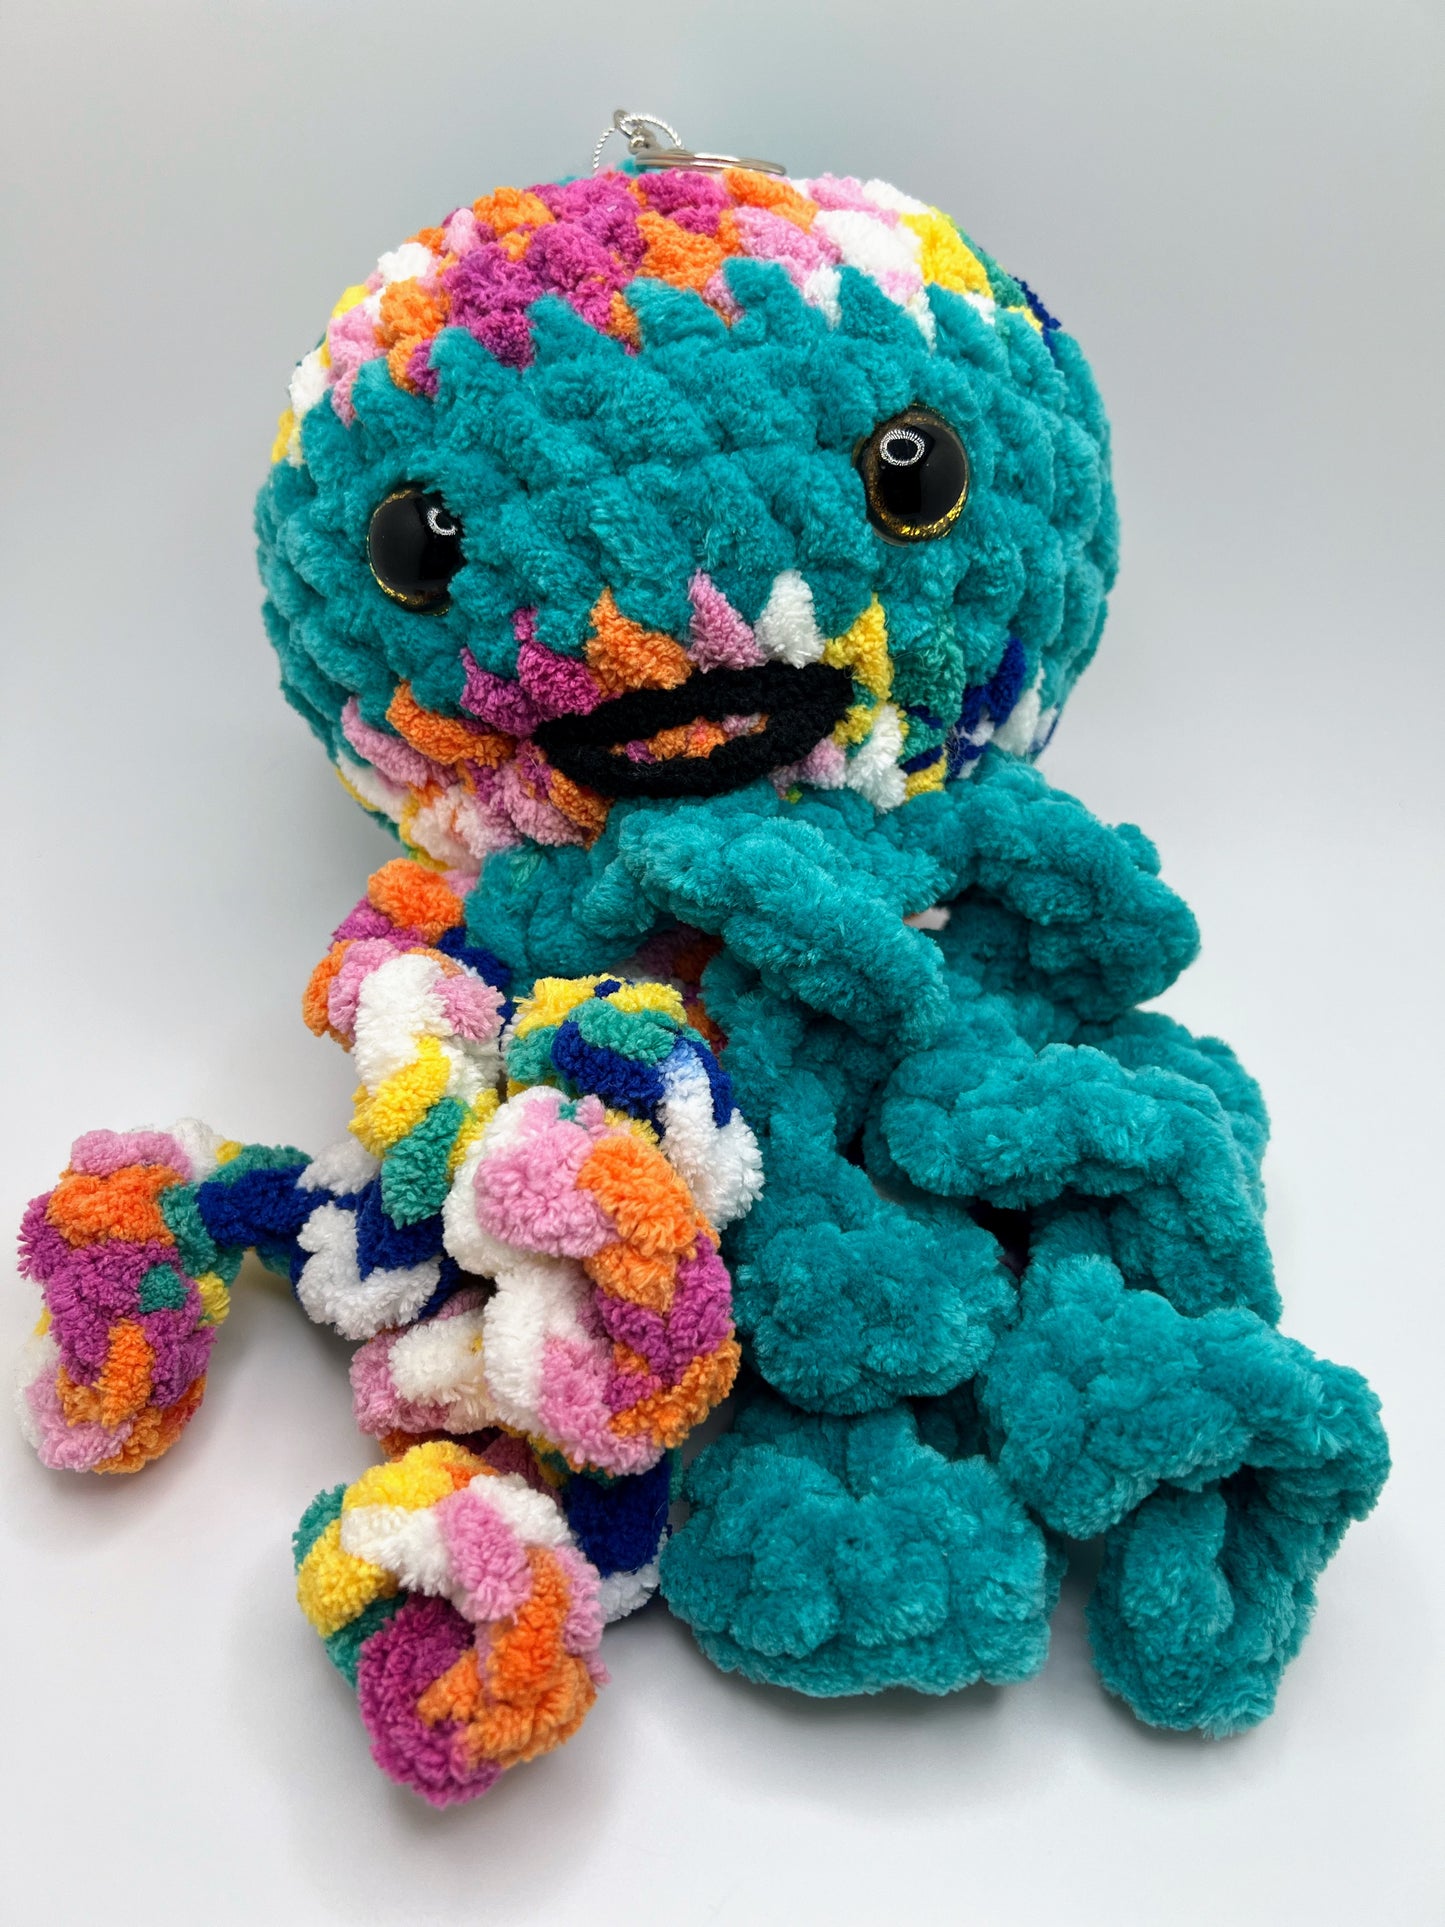 Stuffed mixed Octopus 🐙 - Crochet Knitted Amigurumi Toy- Big Keychain (Different Colors)